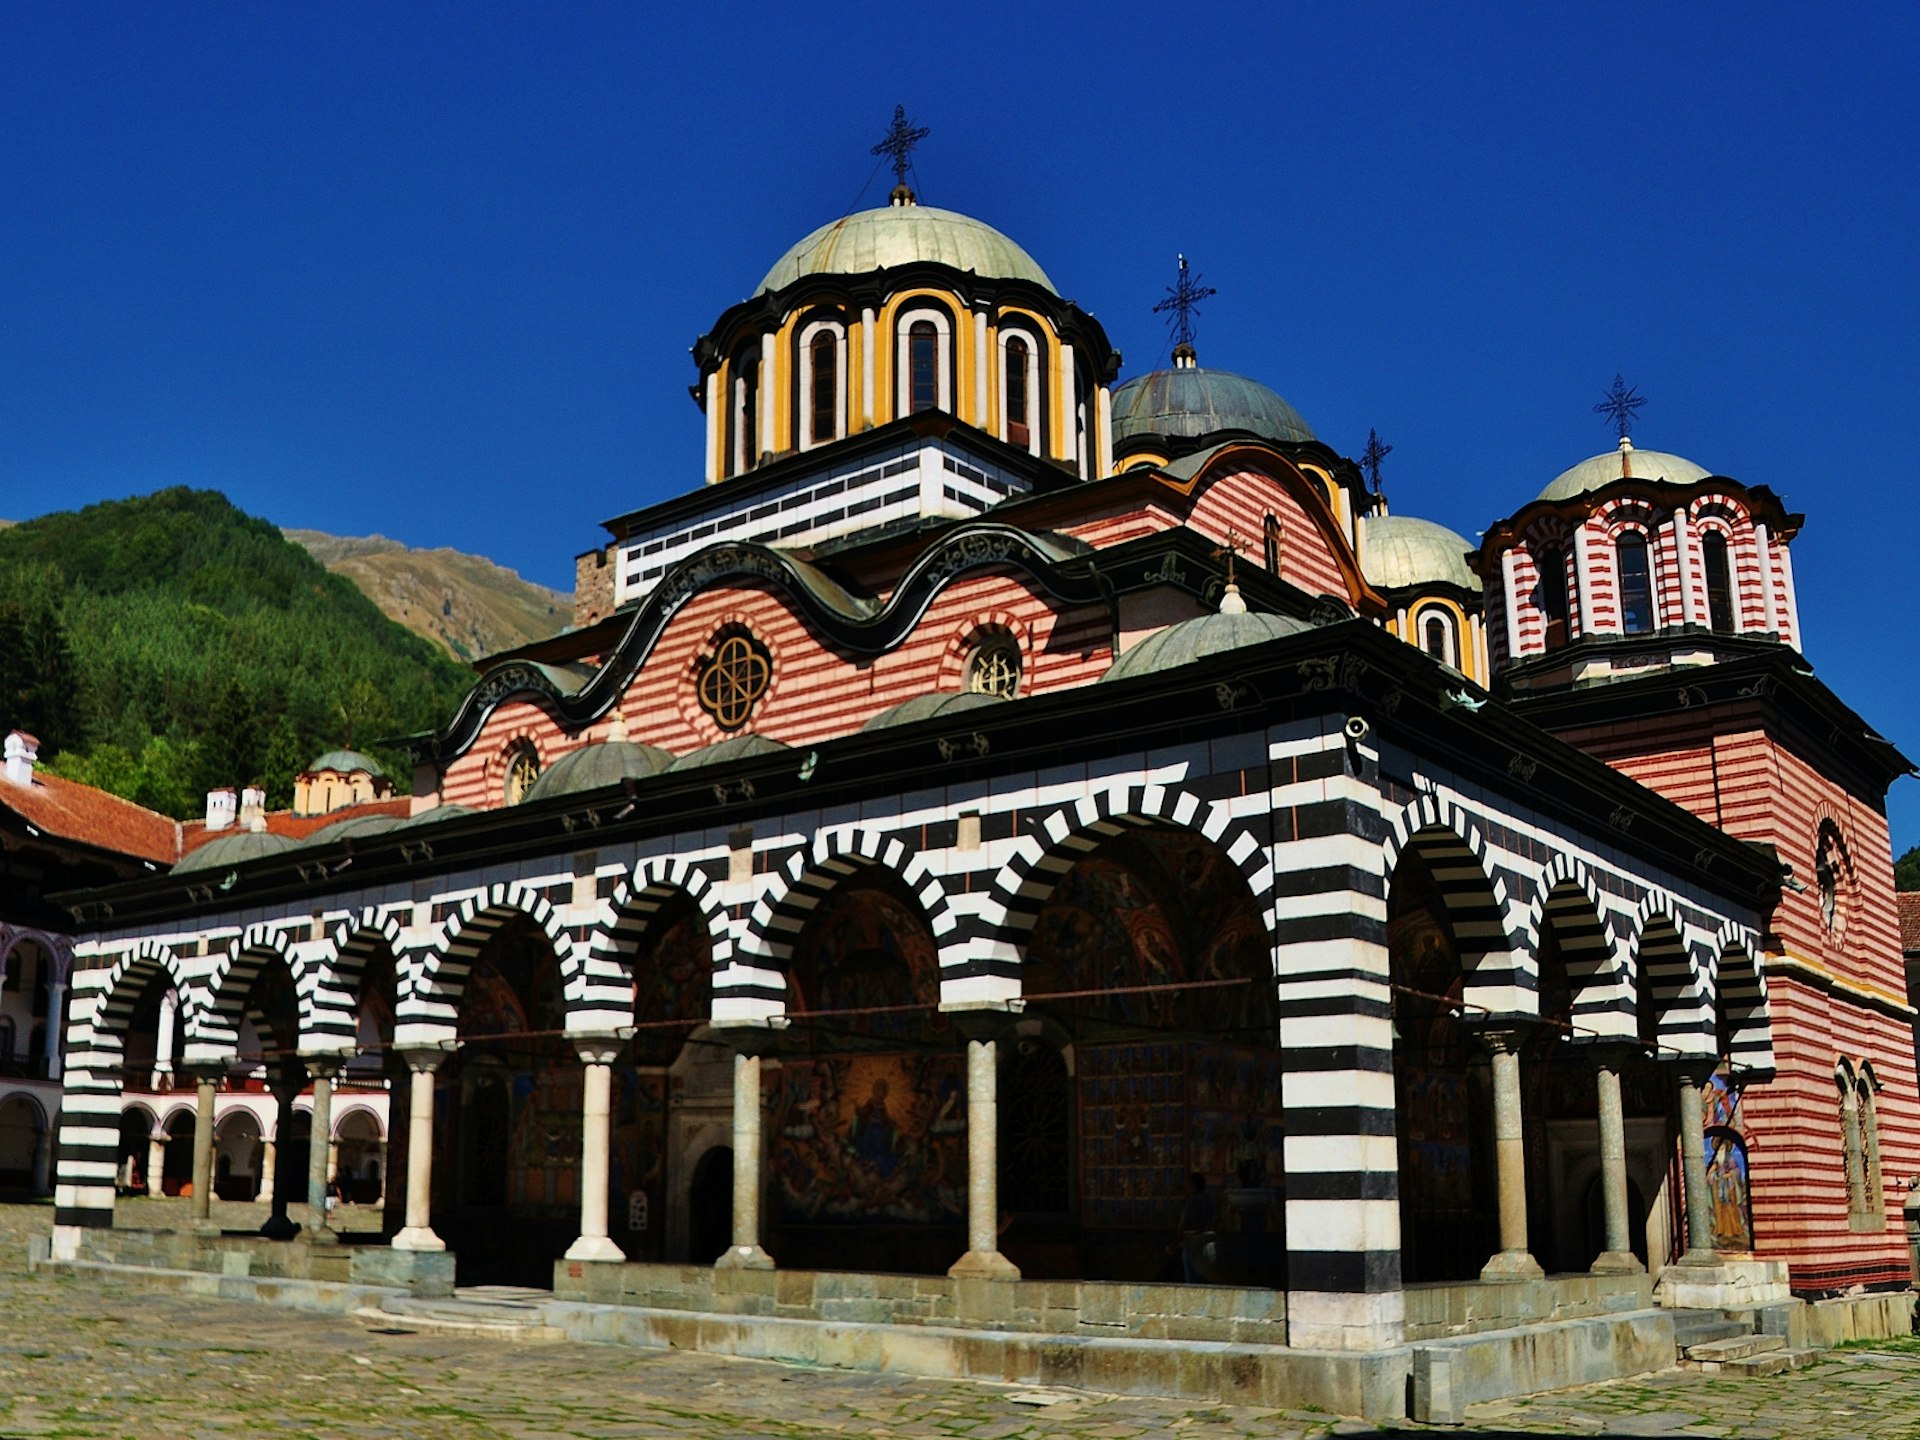 The colourful Rila Monastery, one of Bulgaria's most sacred sites © K.O.Photography / Shutterstock